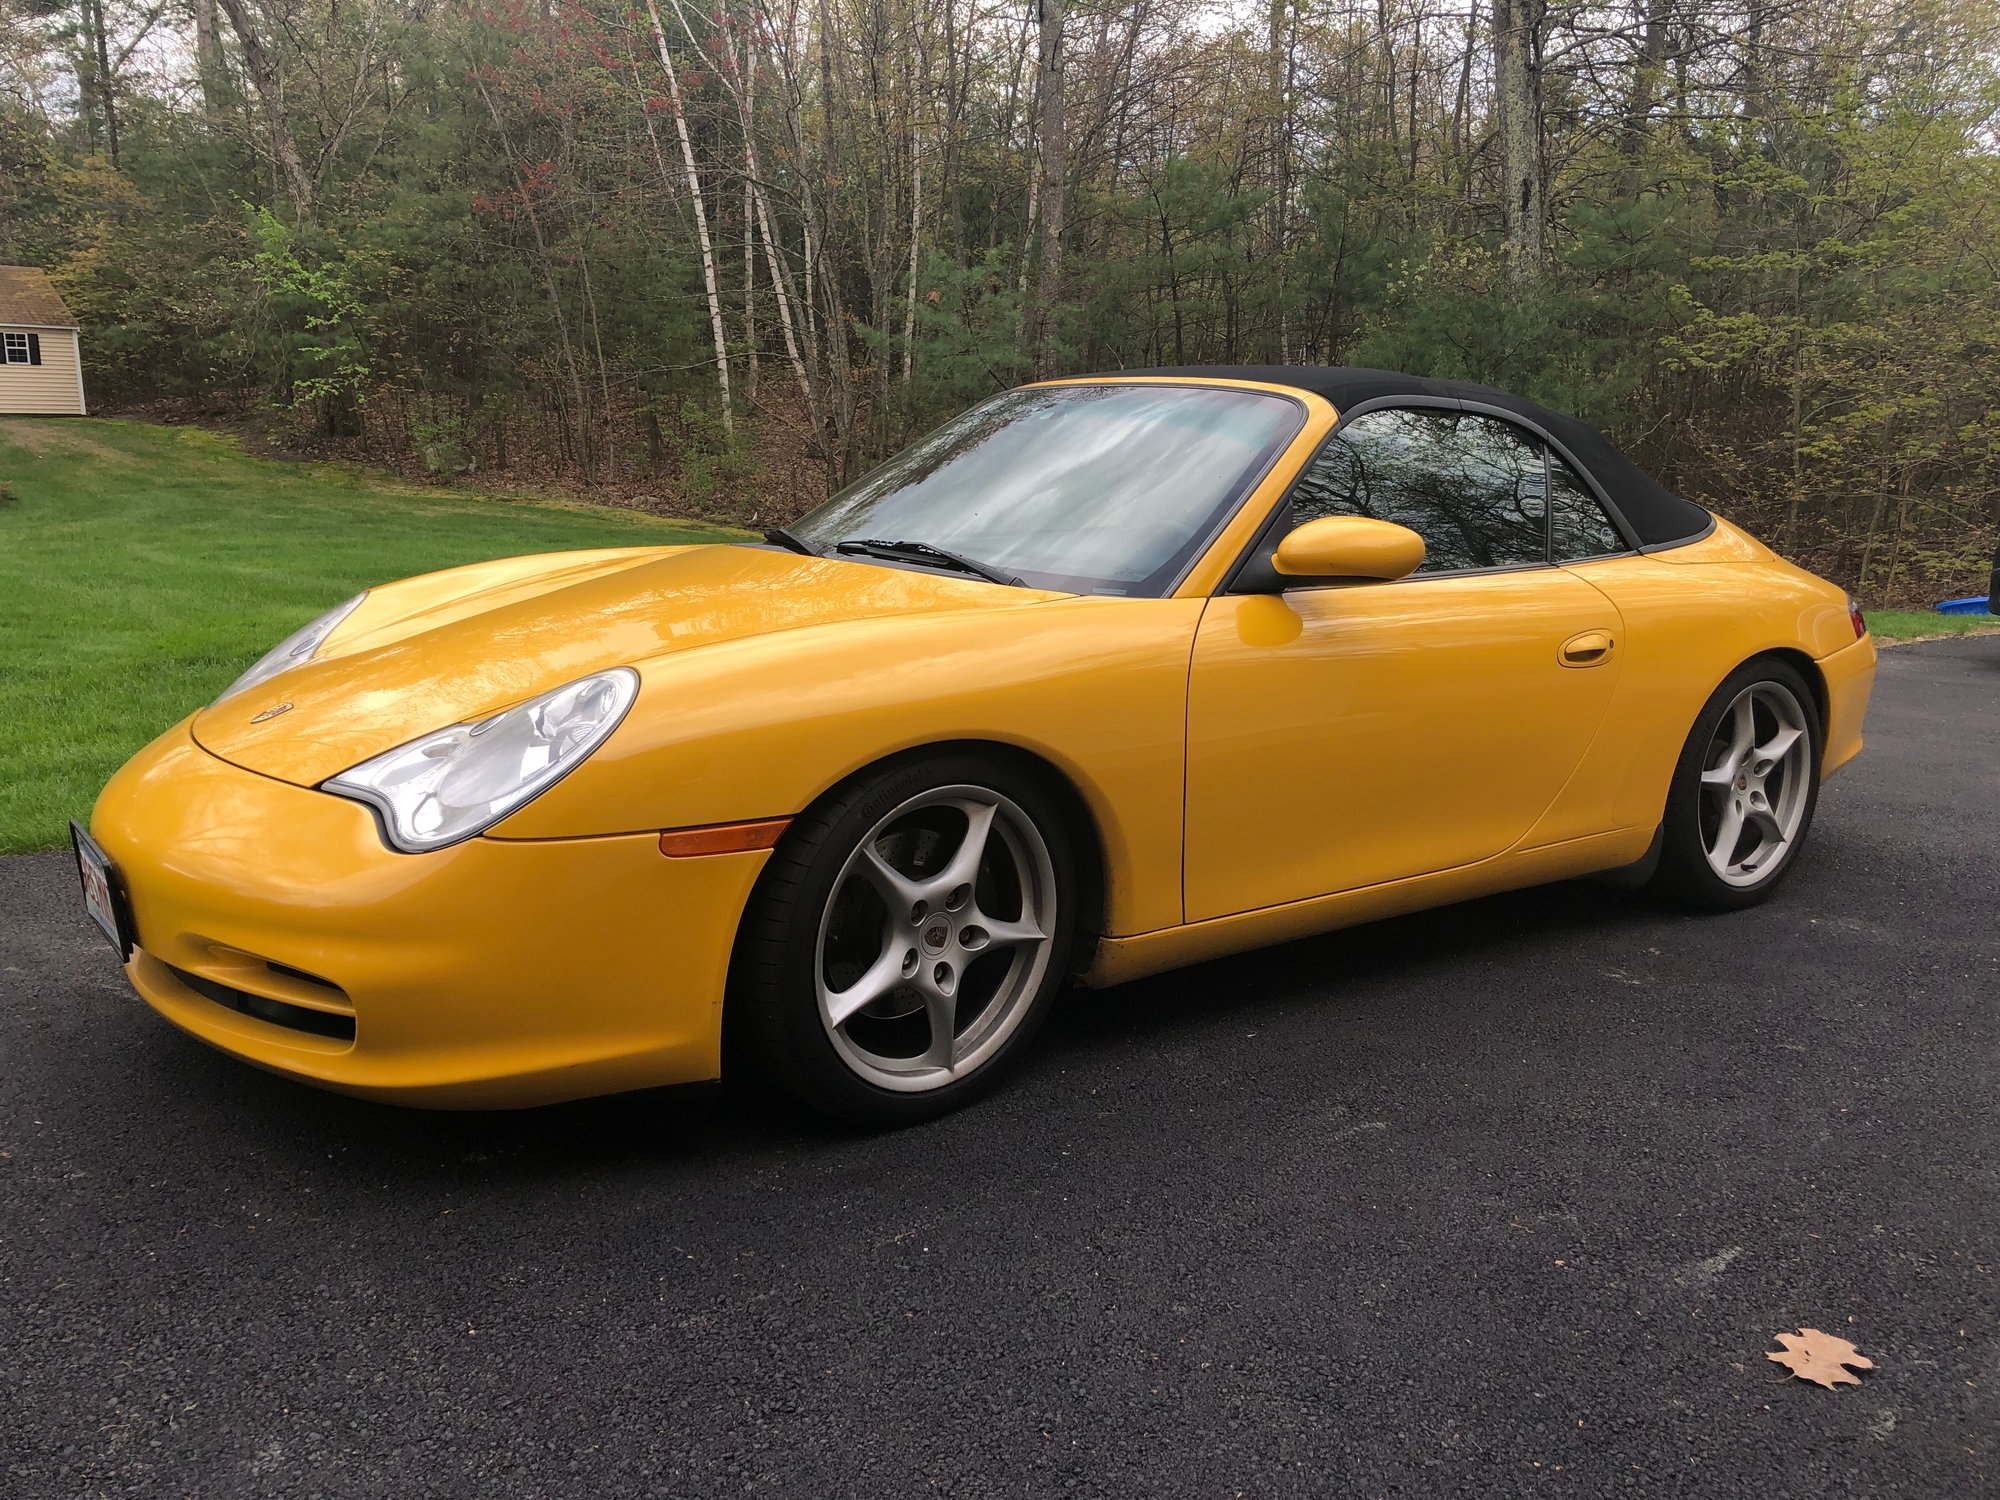 2002 Porsche 911 - 2002 Porsche 911 Cabriolet - Used - VIN WP0CA29962S655570 - 87,500 Miles - 6 cyl - 2WD - Manual - Convertible - Yellow - Groton, MA 01450, United States